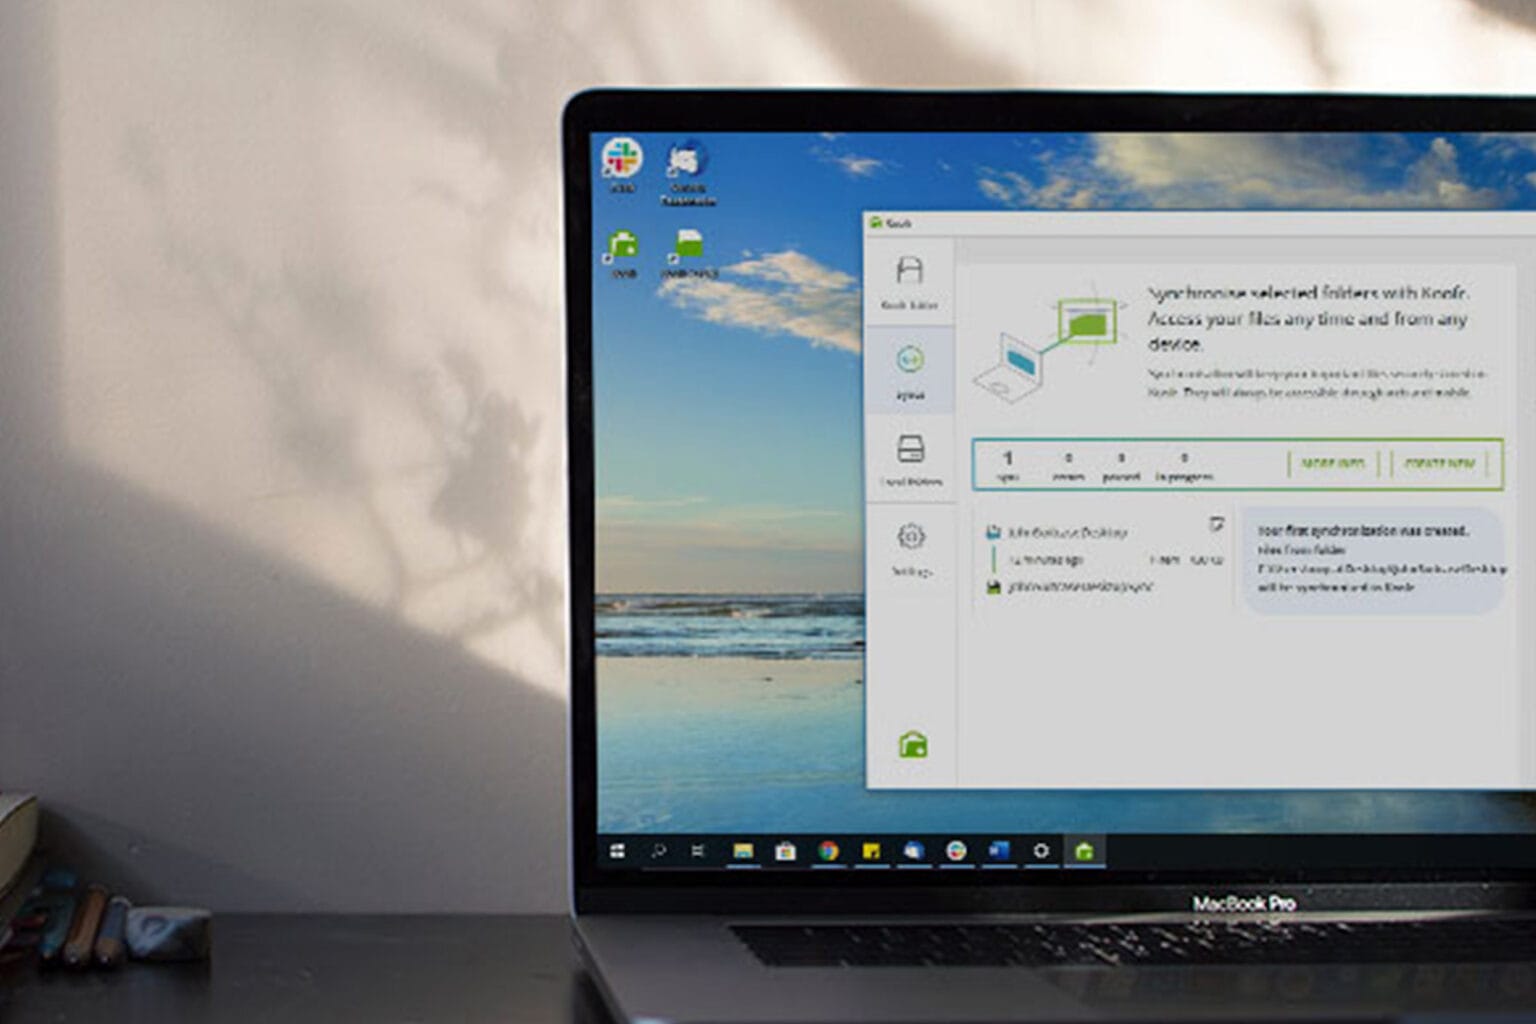 Free up space on your devices with 1TB of cloud storage for life, less than $112 now.